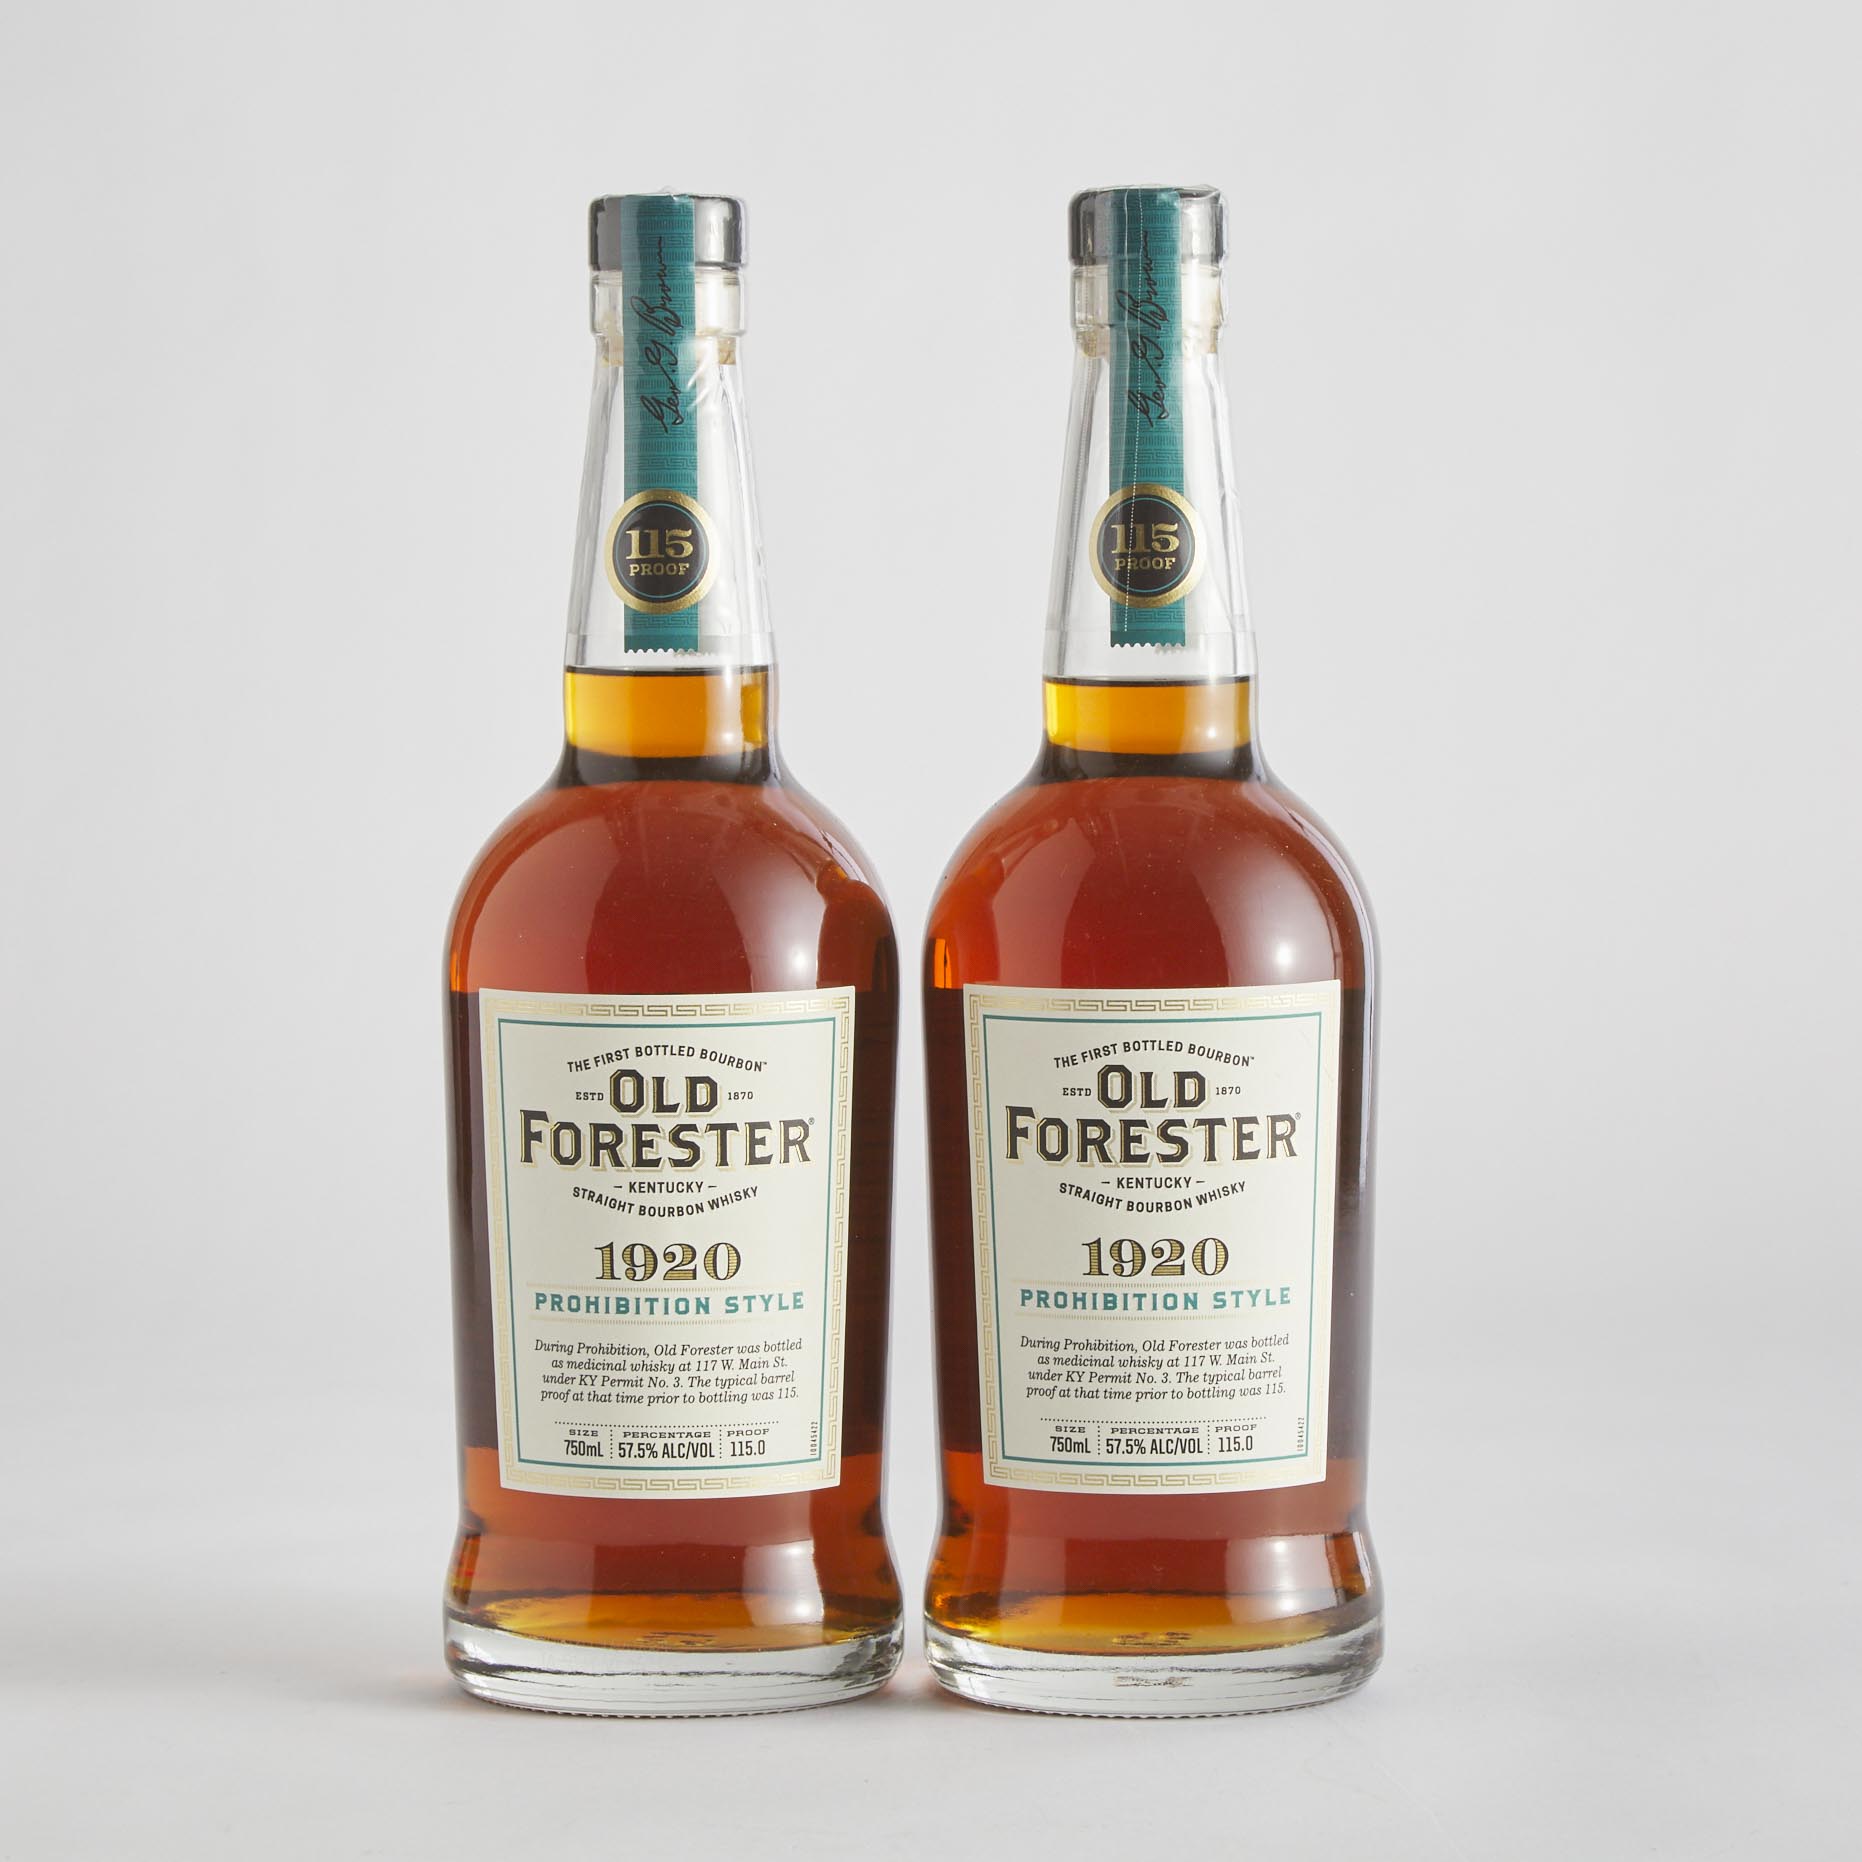 OLD FORESTER KENTUCKY STRAIGHT BOURBON WHISKY NAS (TWO 750 ML)